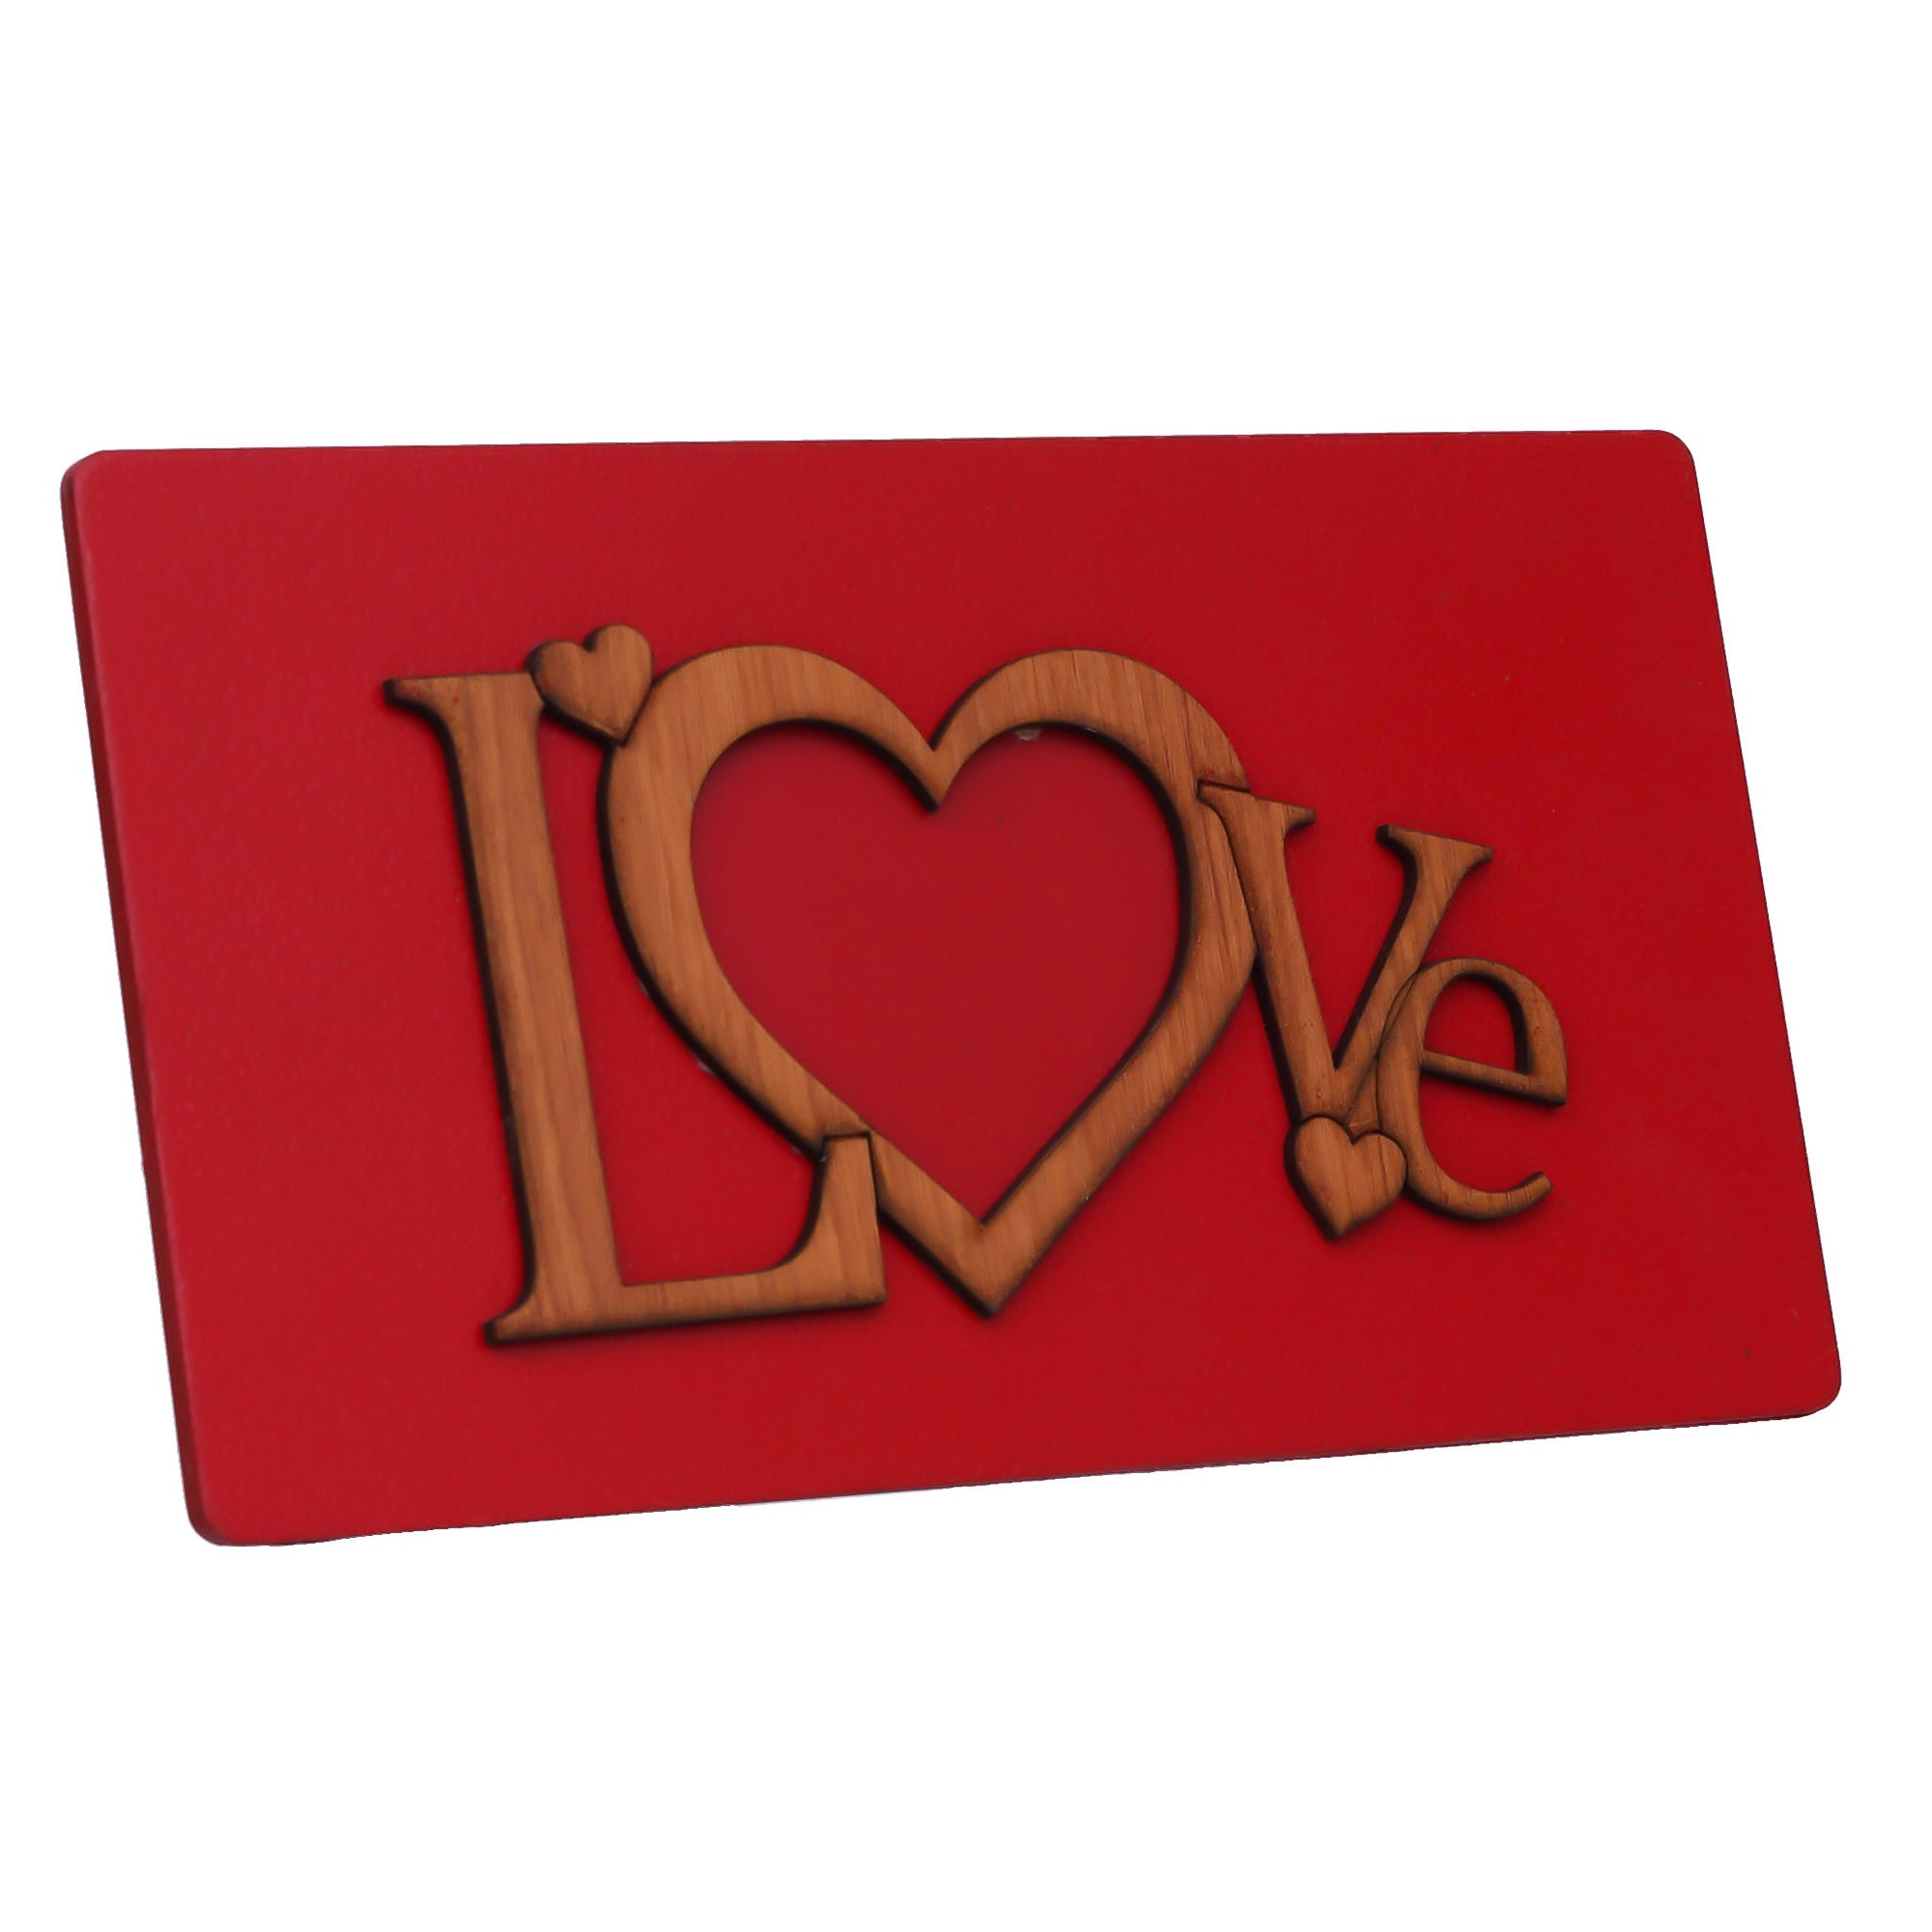 Valentine Combo of "Love" Wooden Photo Frame With Red Stand, Red Heart Shaped Gift Box 5